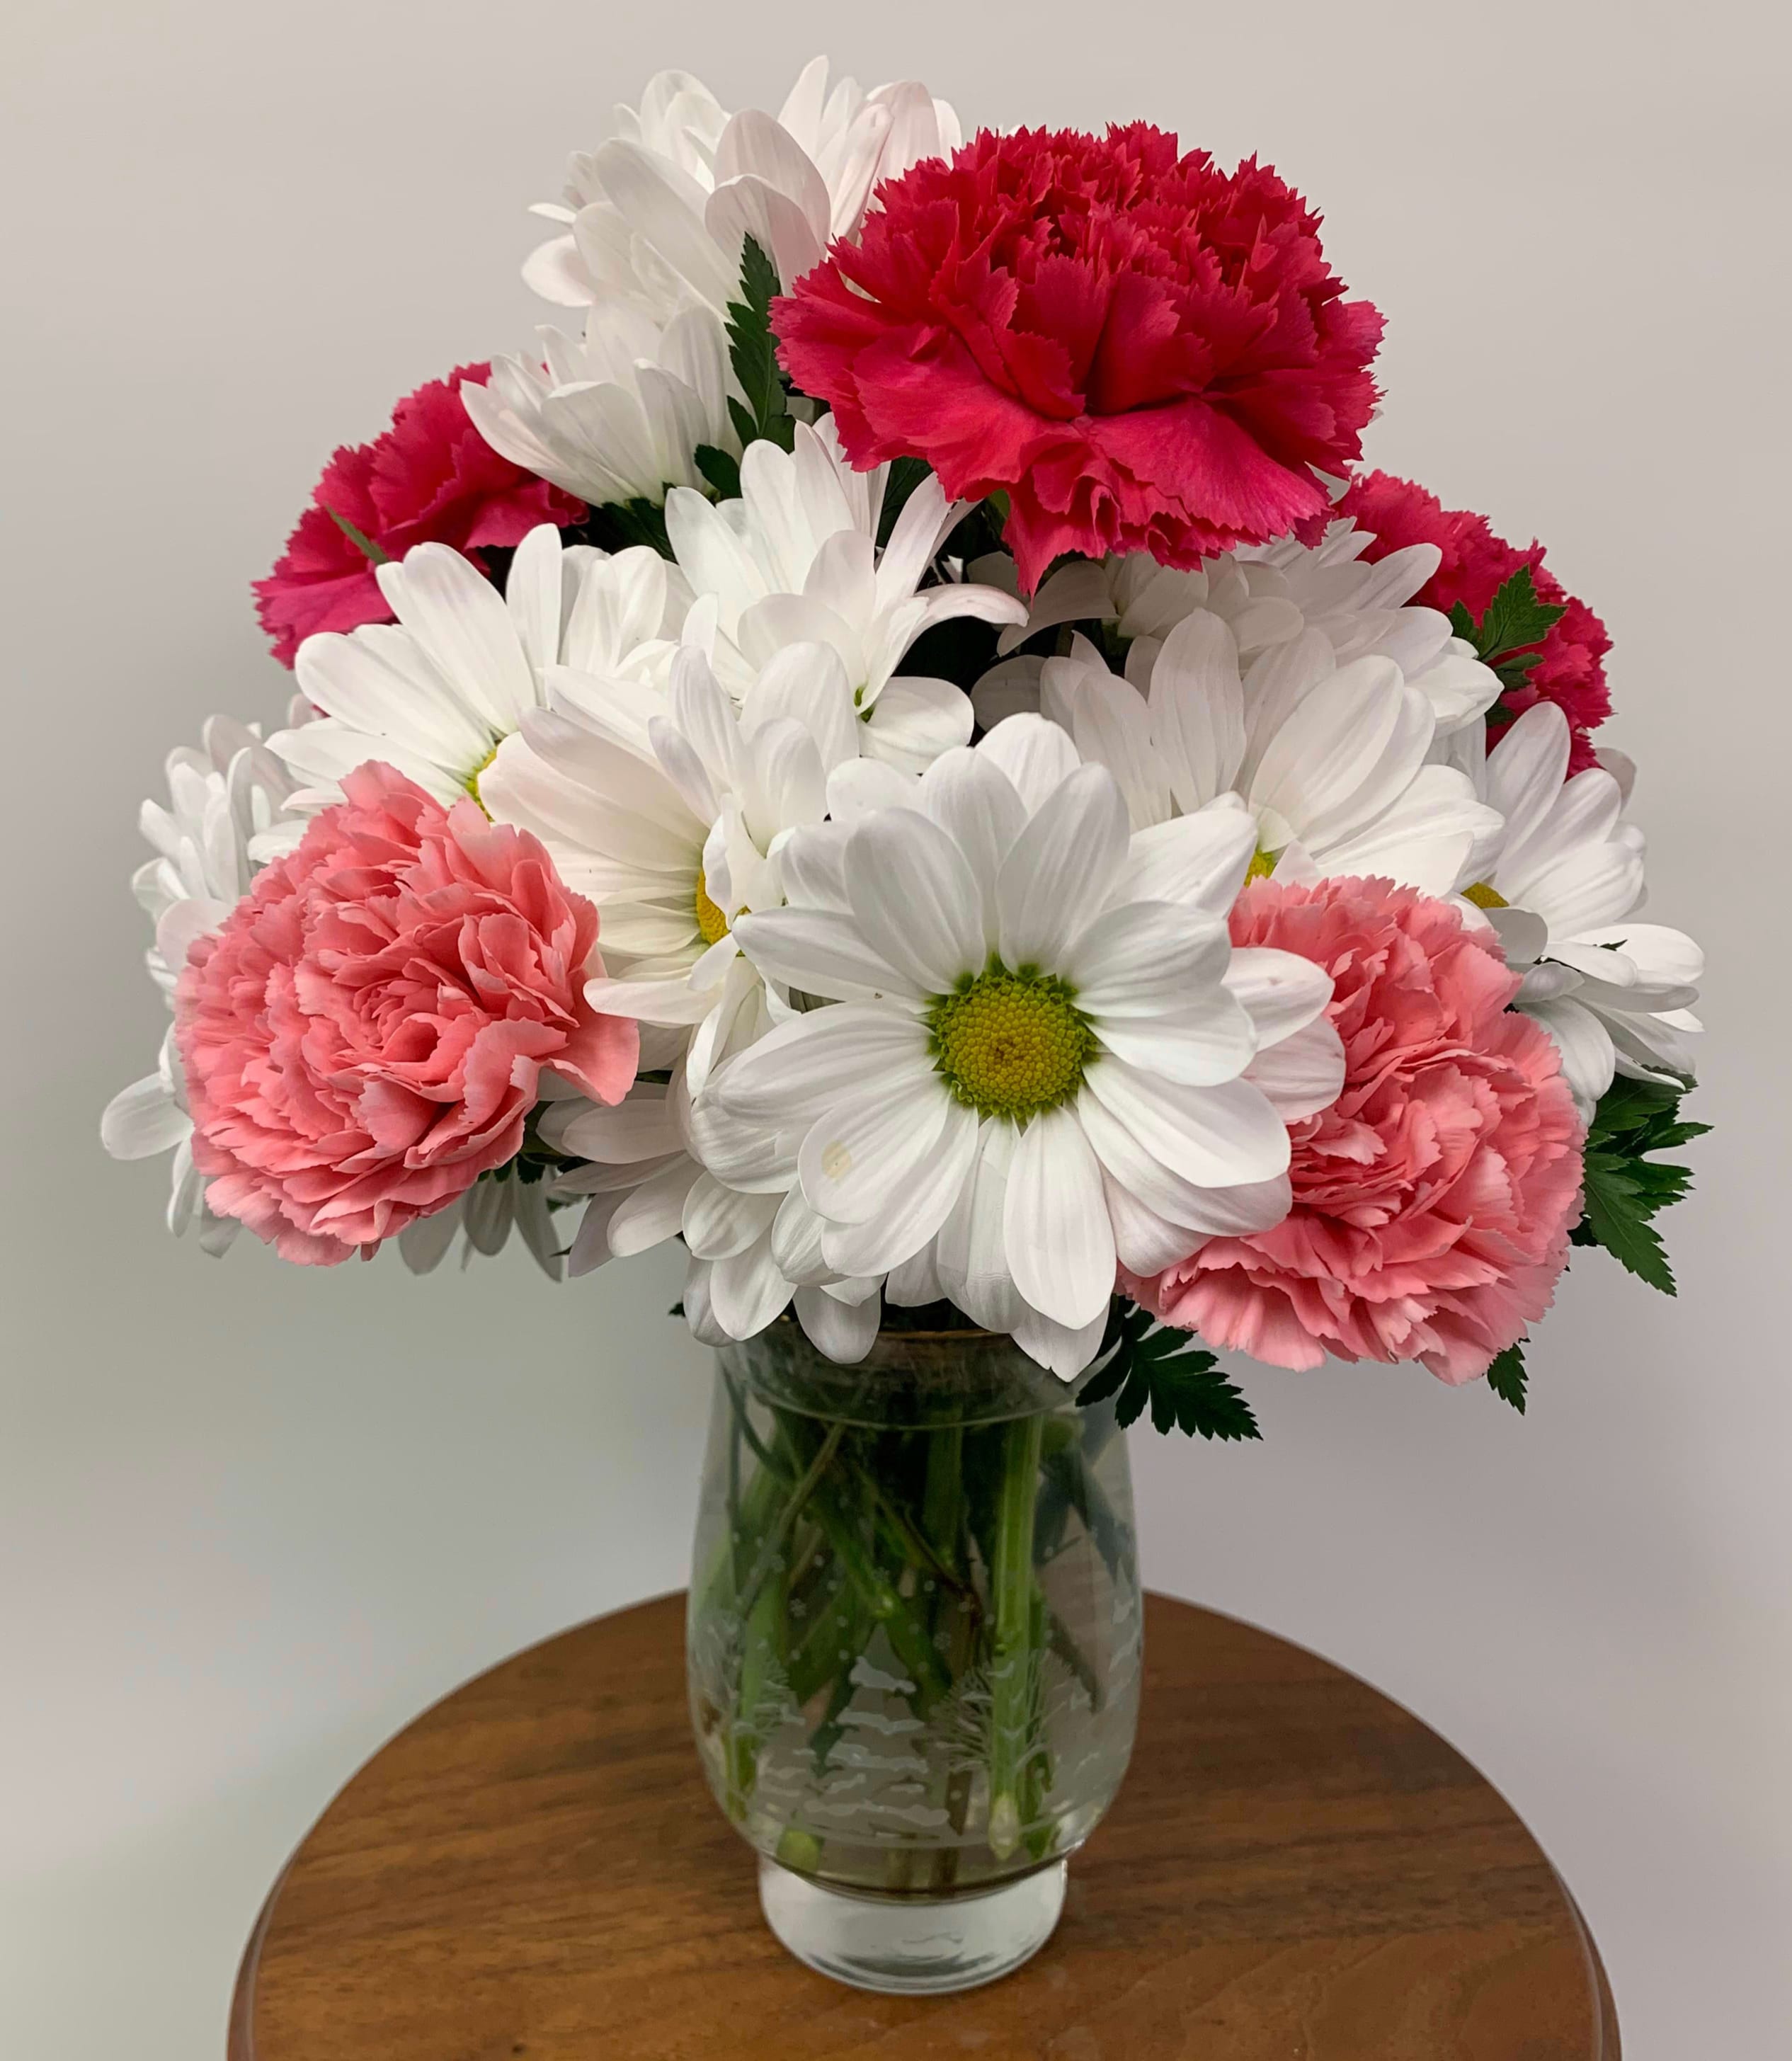 Daisy Crazy - A modest gift that will make a lasting impression. Daisy Crazy is the perfect gift for a birthday or just to show you care.  Carnation color will be choice of designer unless you specify in special instructions. Arrangement Details: Comes in a clear glass vase of designers choice and includes white chrysanthemum spray daisies, carnations, and assorted greenery.